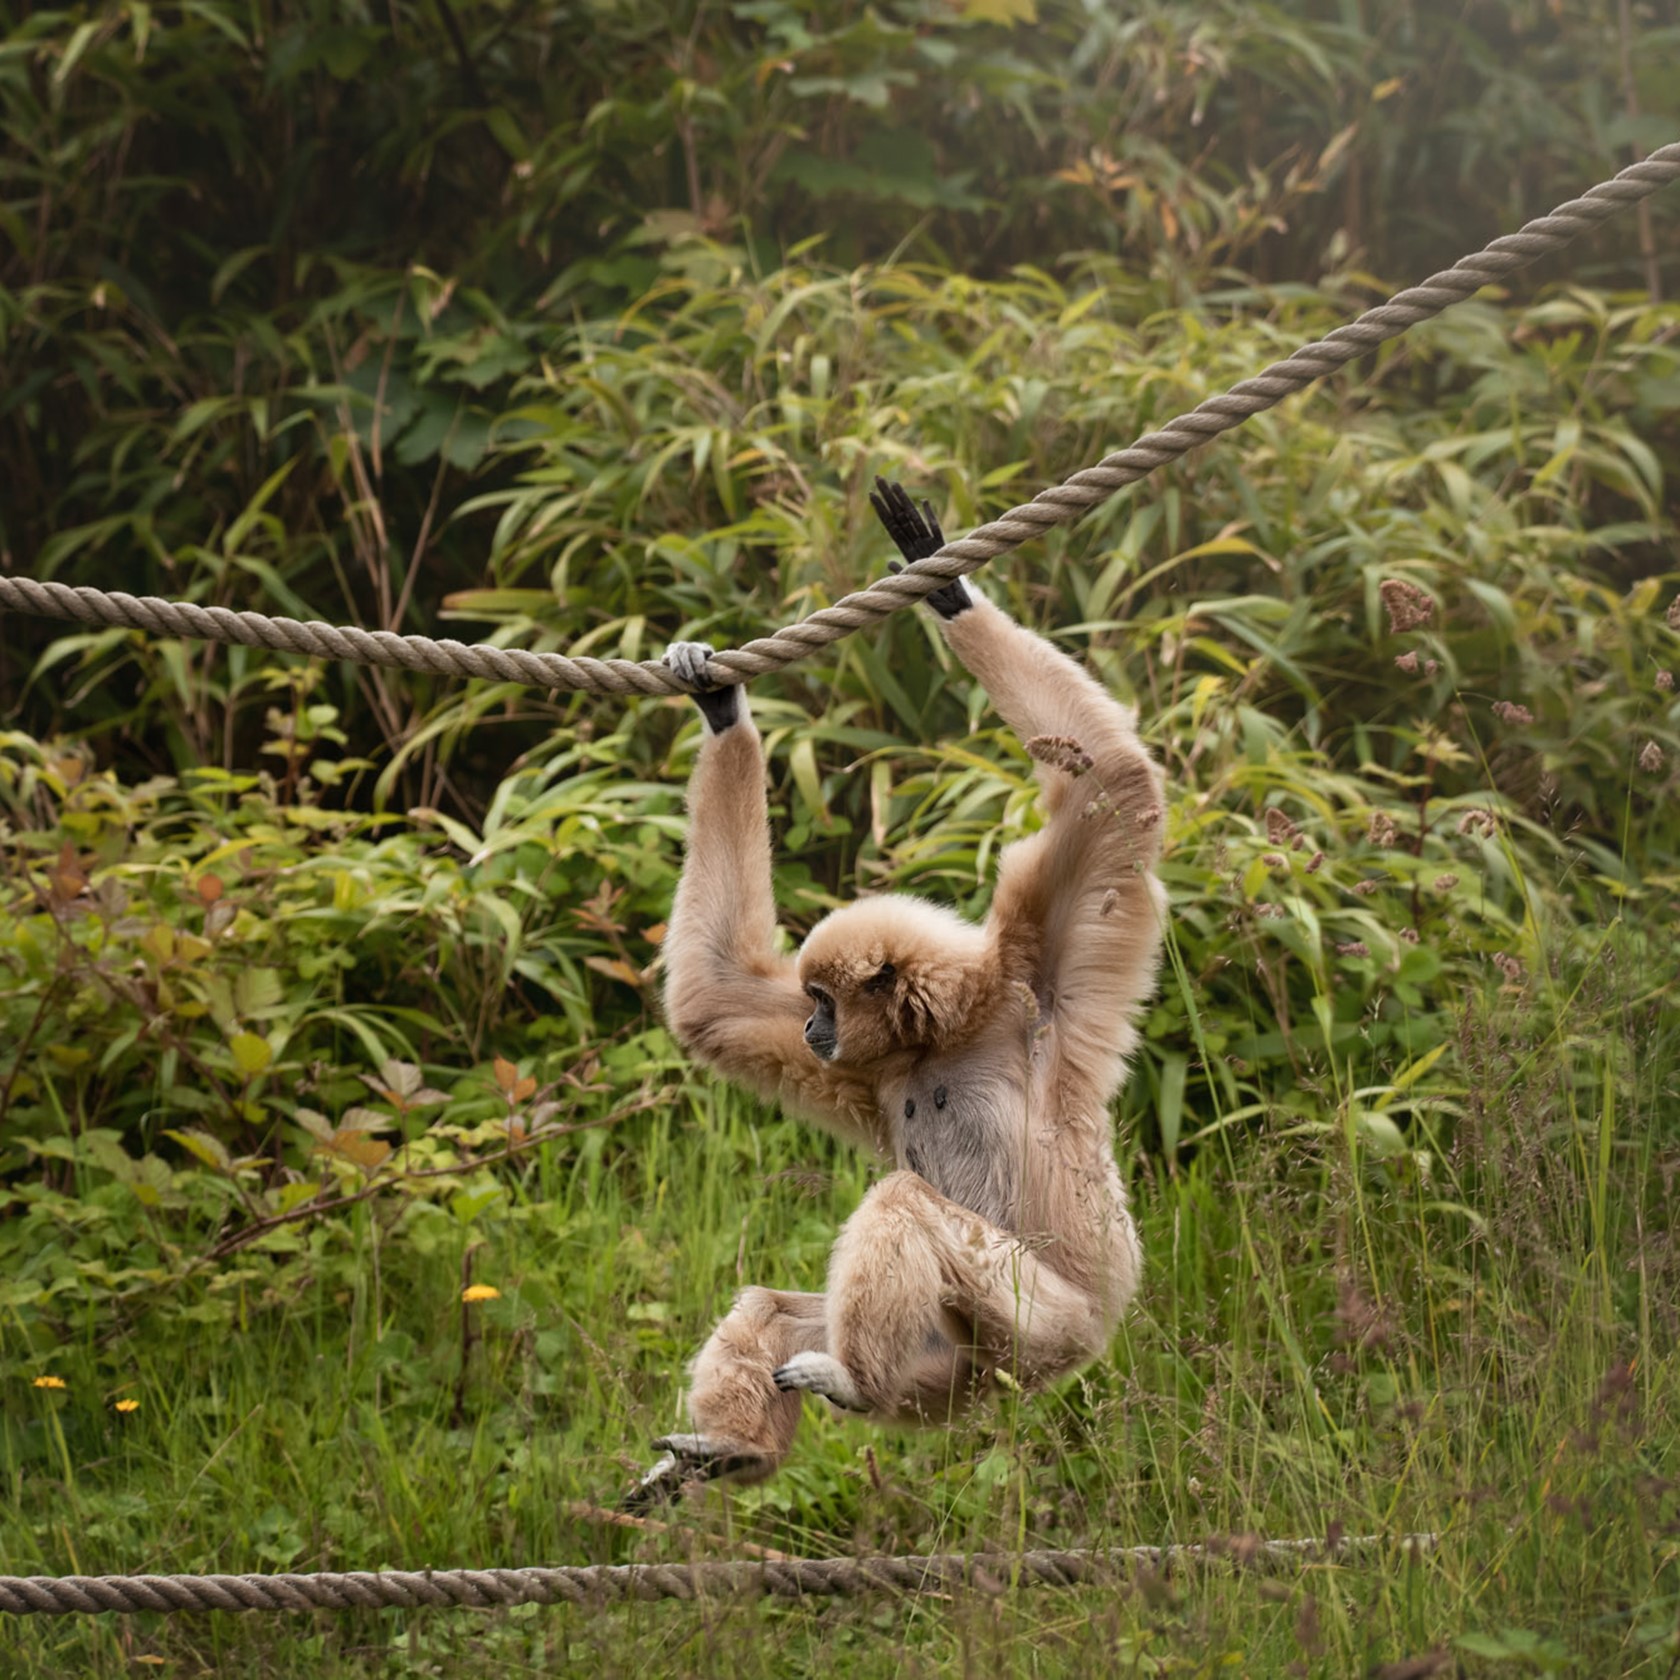 White-handed gibbon swings across a rope at Jersey Zoo